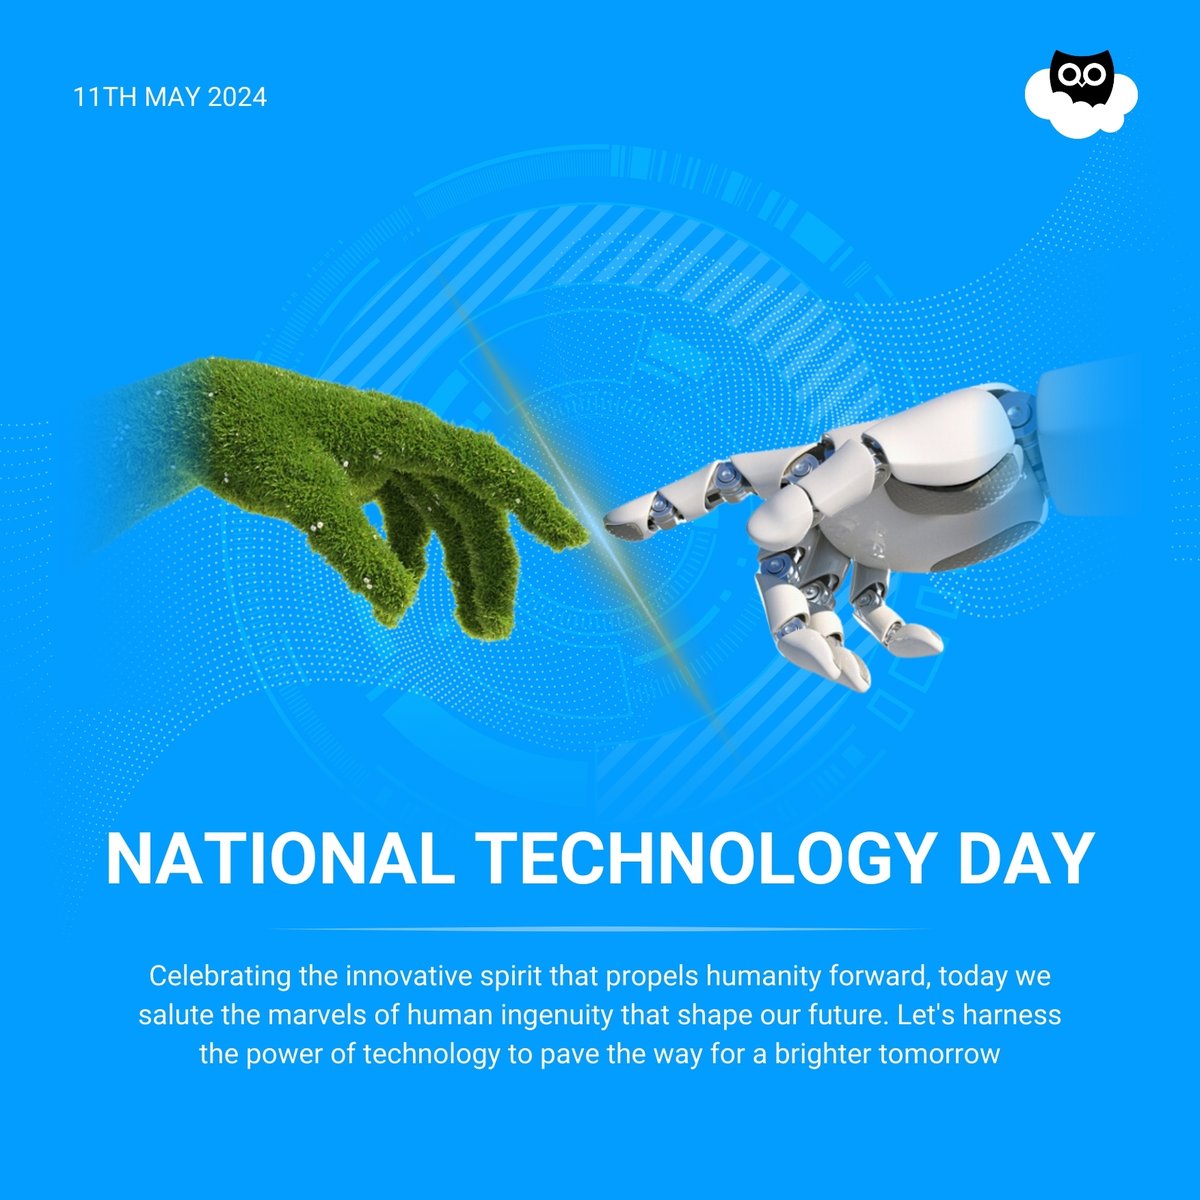 Happy National Technology Day! Celebrating the innovations that shape our world and drive progress. Here's to the brilliant minds revolutionizing industries and improving lives through technology. #Skymet #TechDay #Innovation #FutureForward #WeatherIntelligence #TechnologyDay